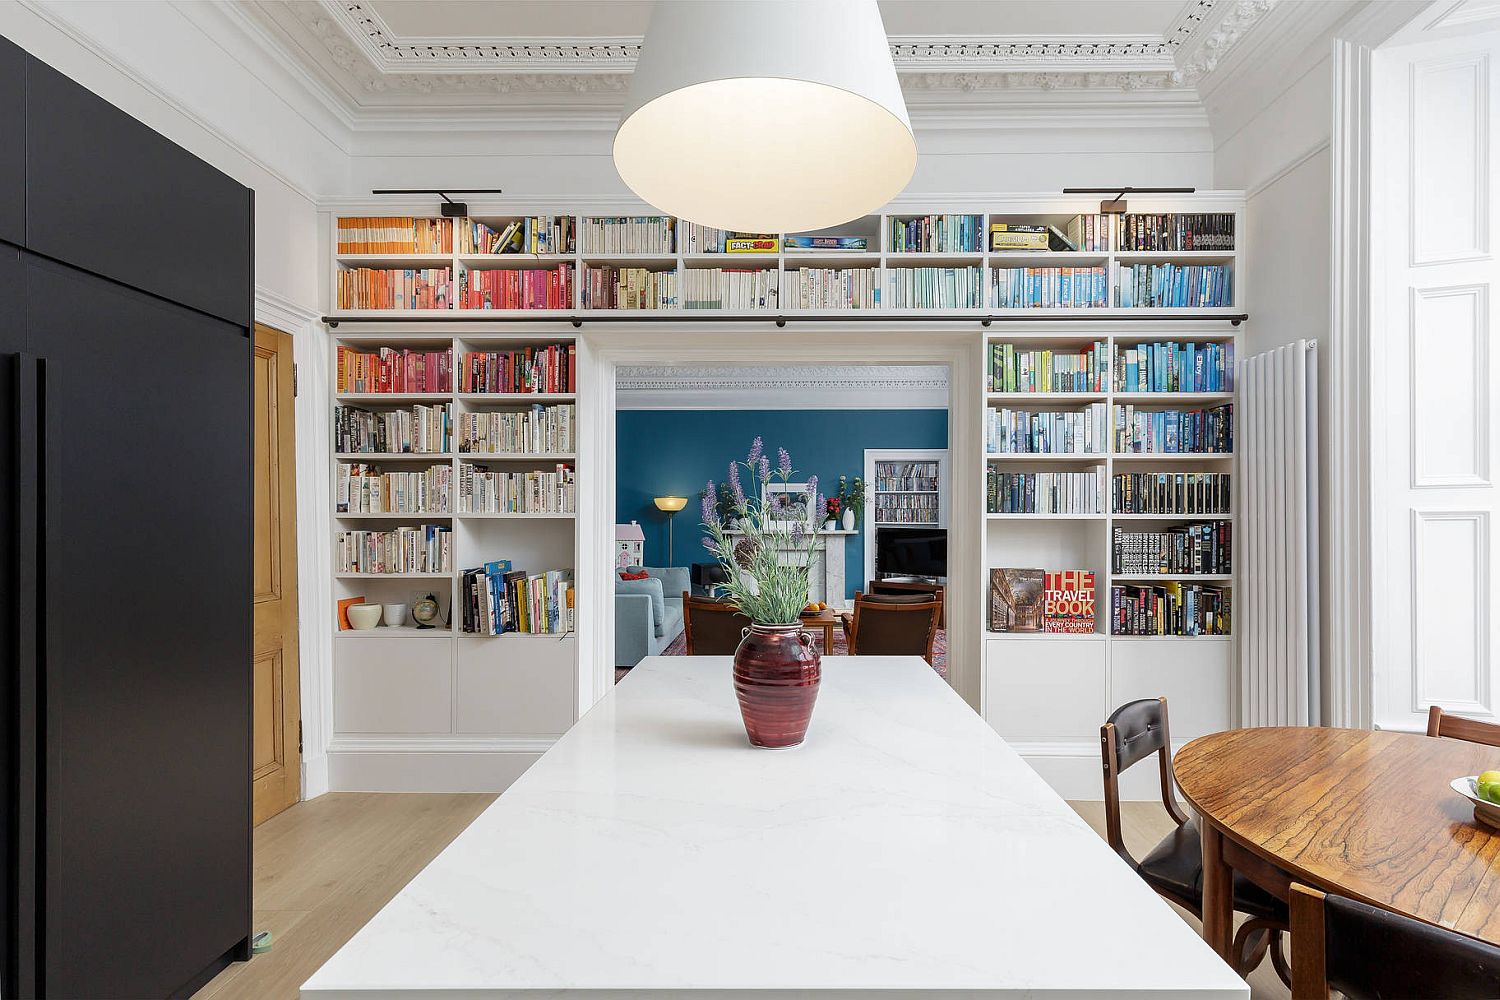 Bookshelves-add-ombre-style-to-the-beautiful-dining-room-and-kitchen